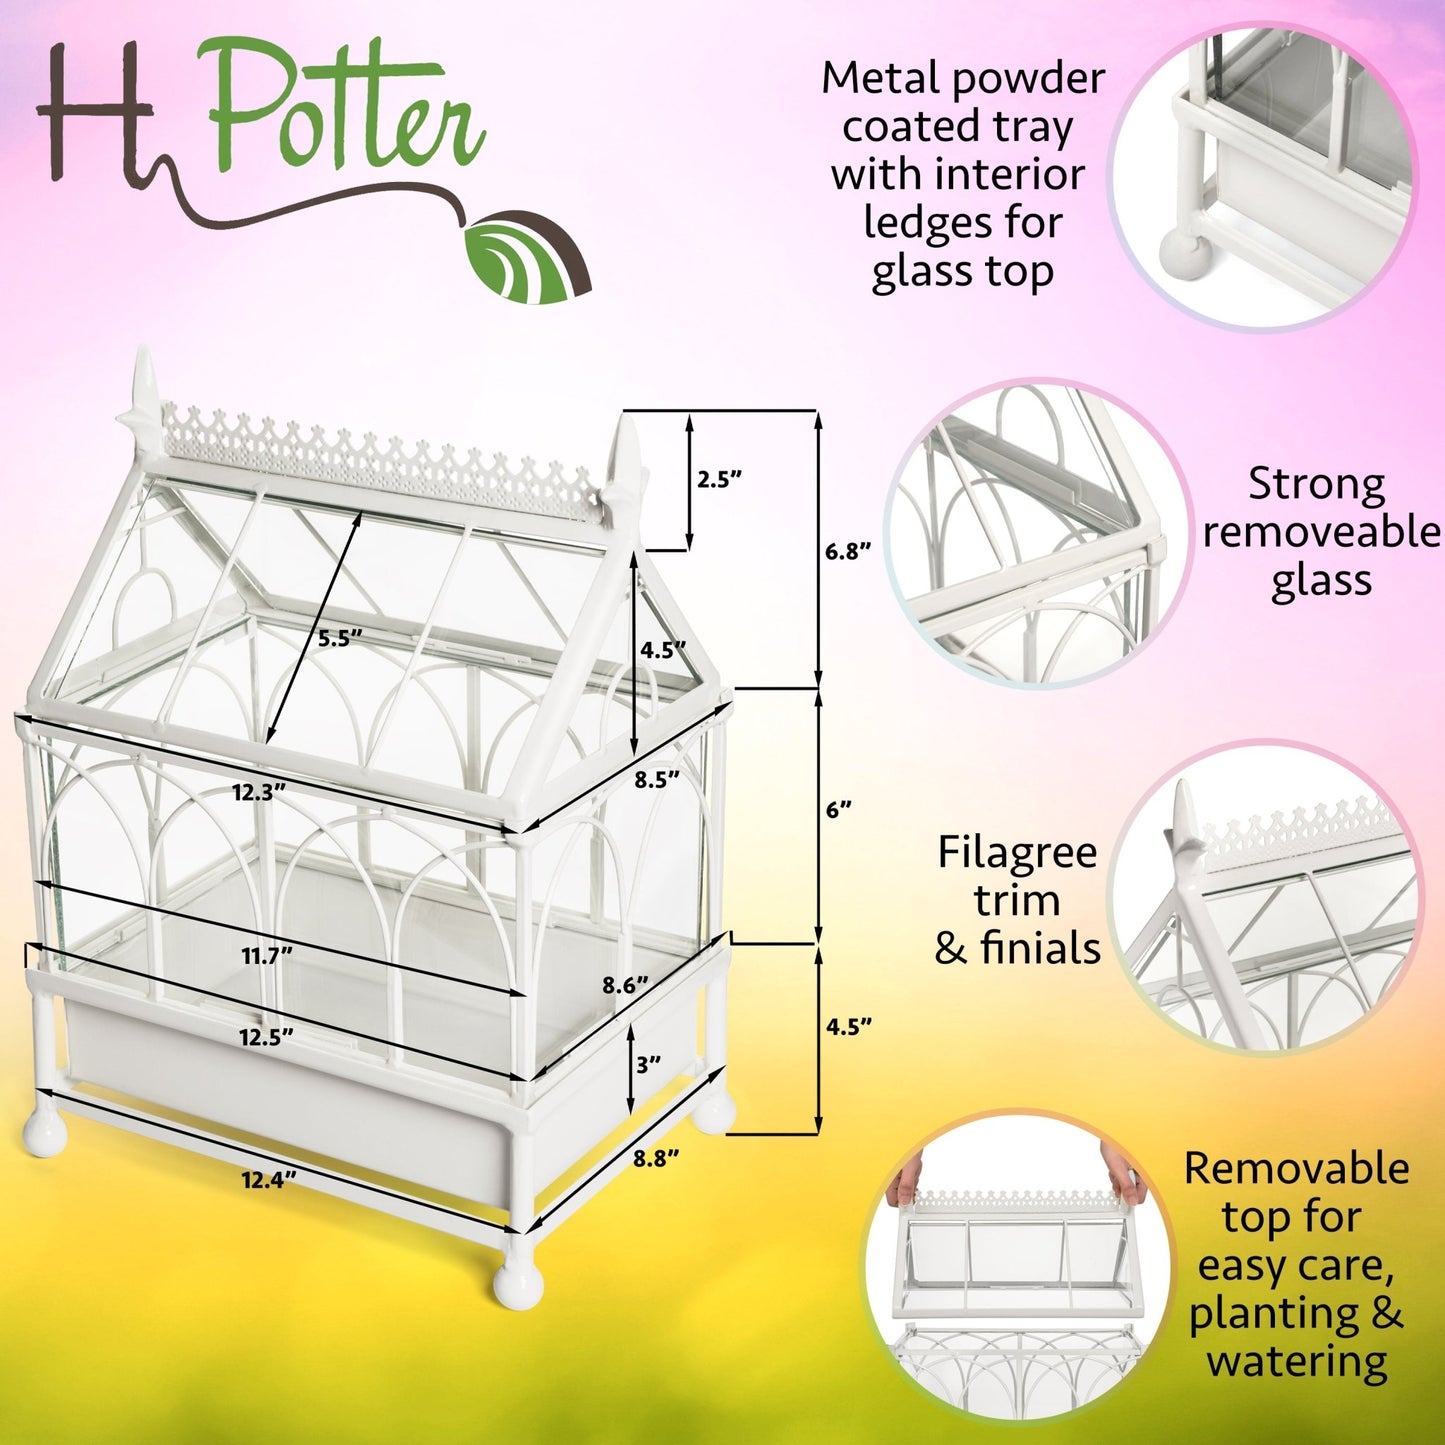 H Potter Terrarium Wardian Case Metal Tabletop orchid case gift for mom mothers day valentine christmas metal and glass